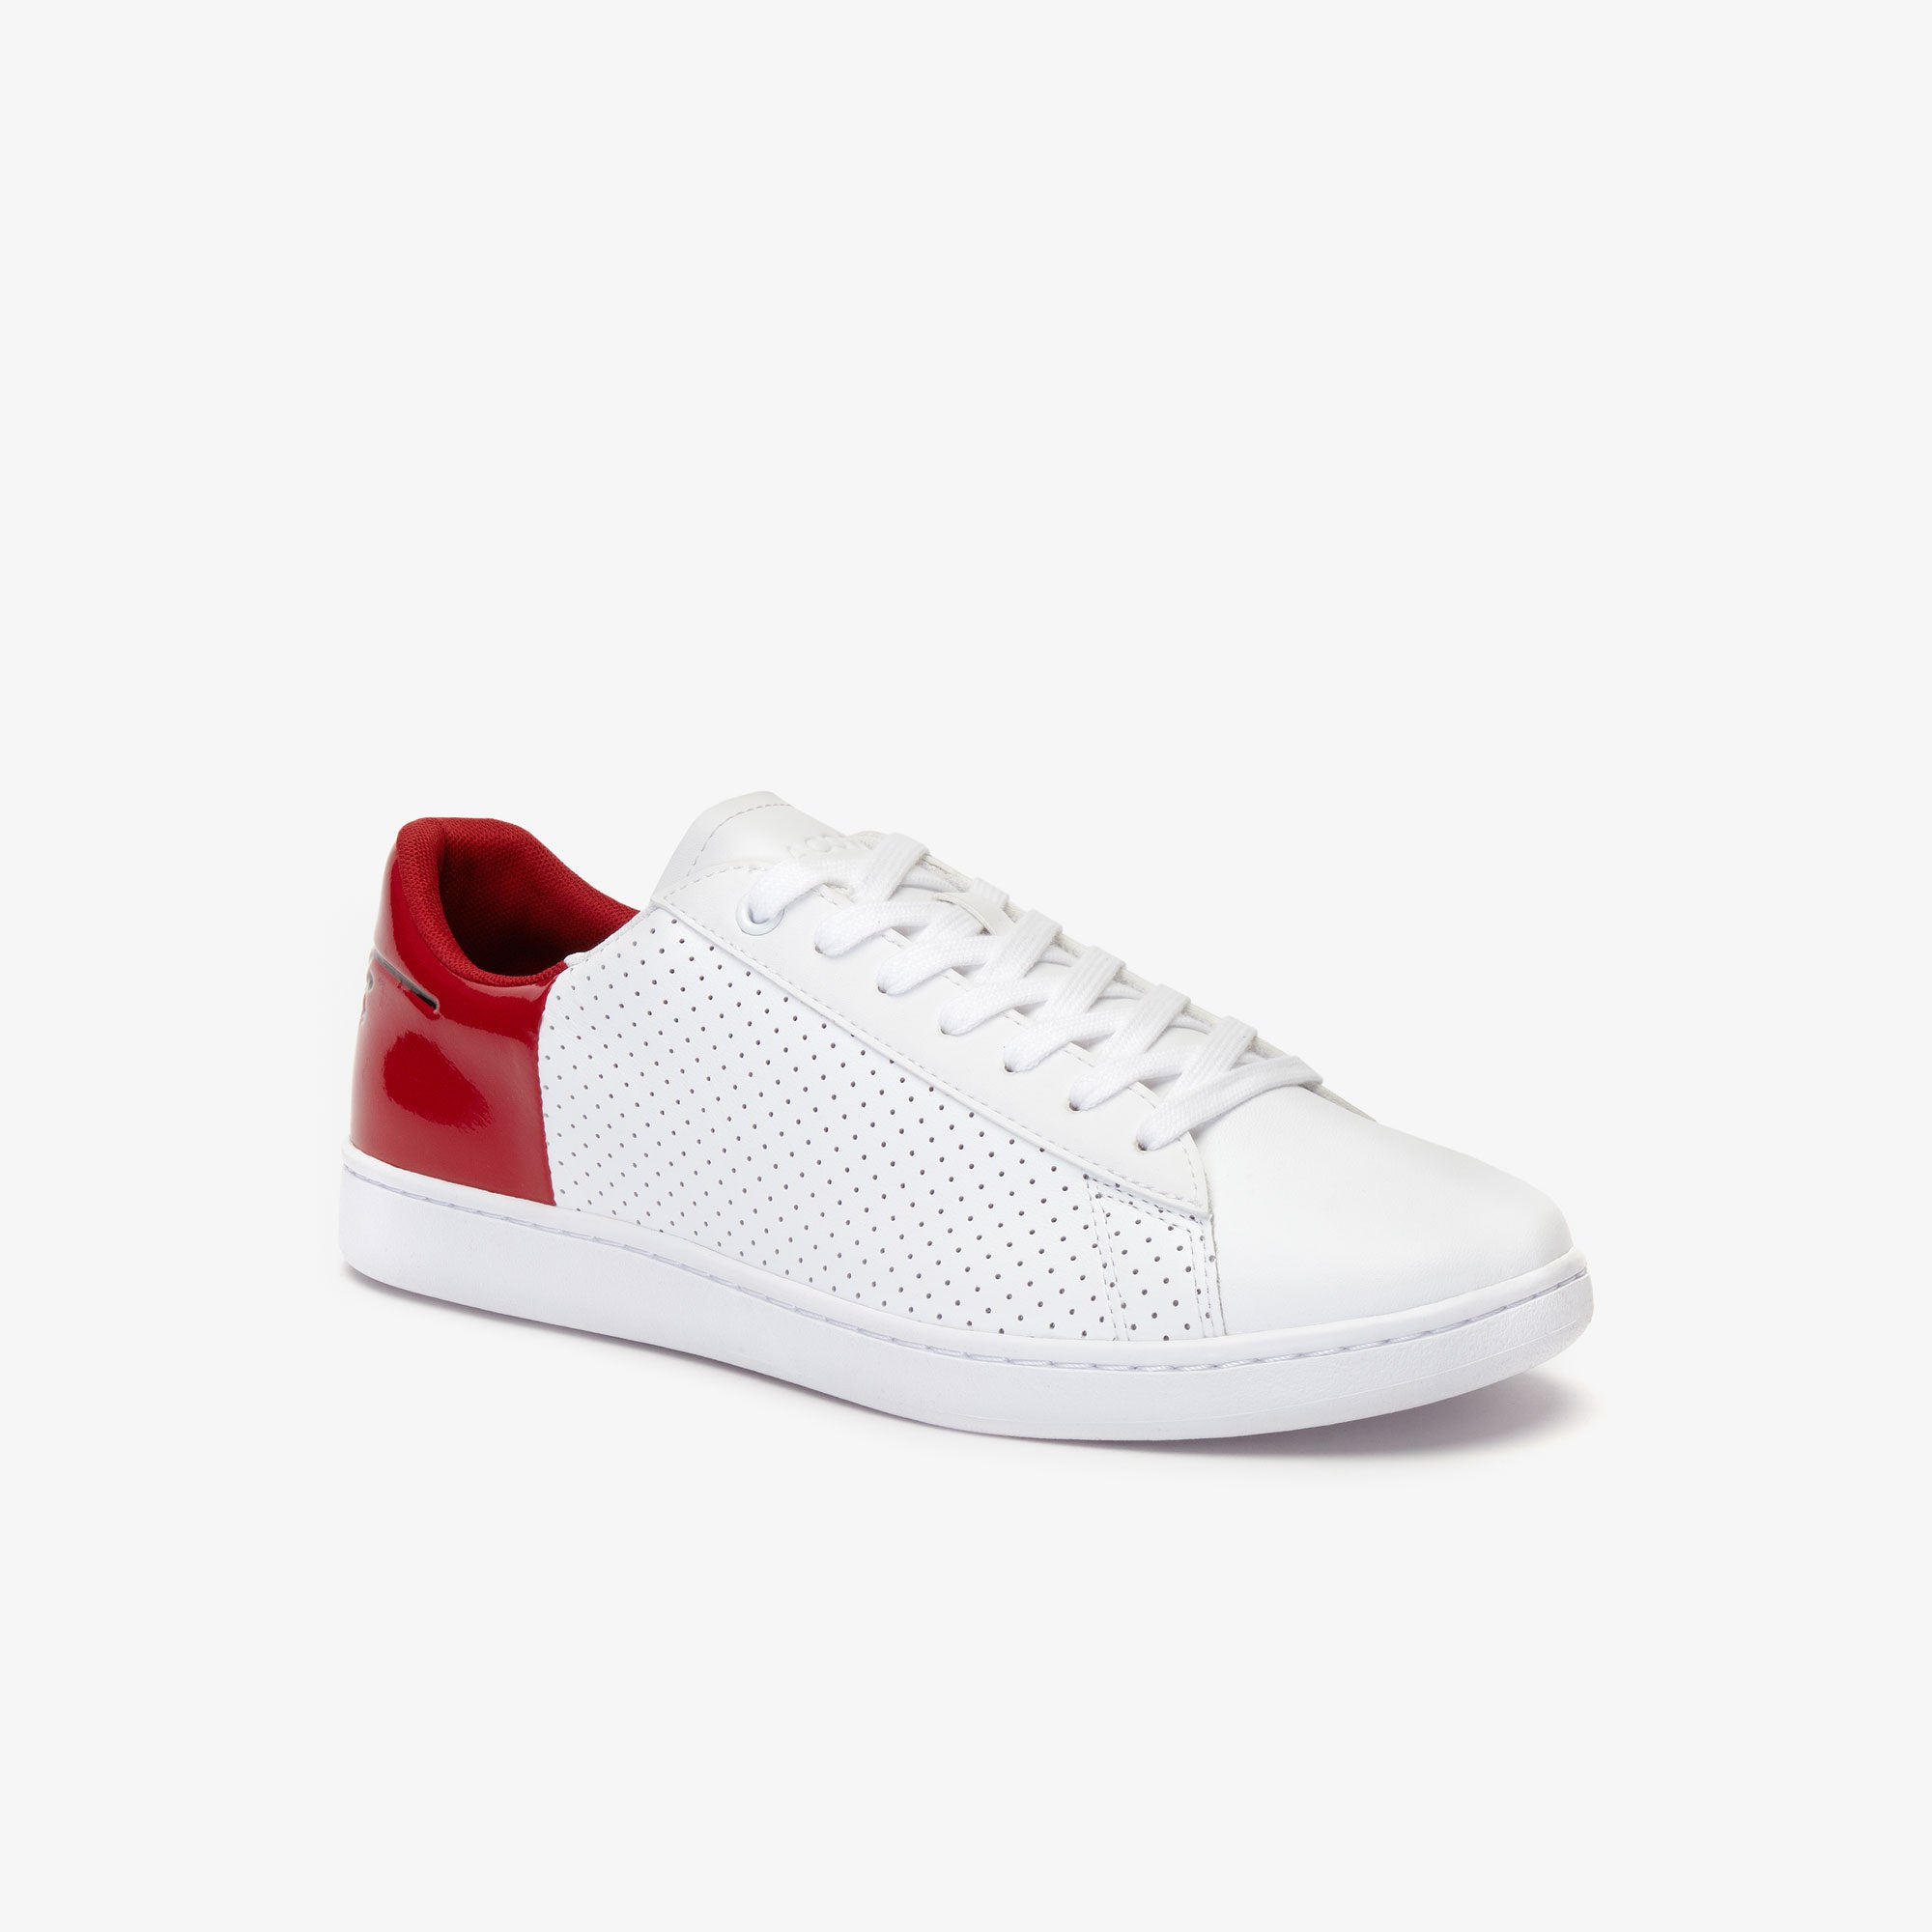 white lacoste tennis shoes